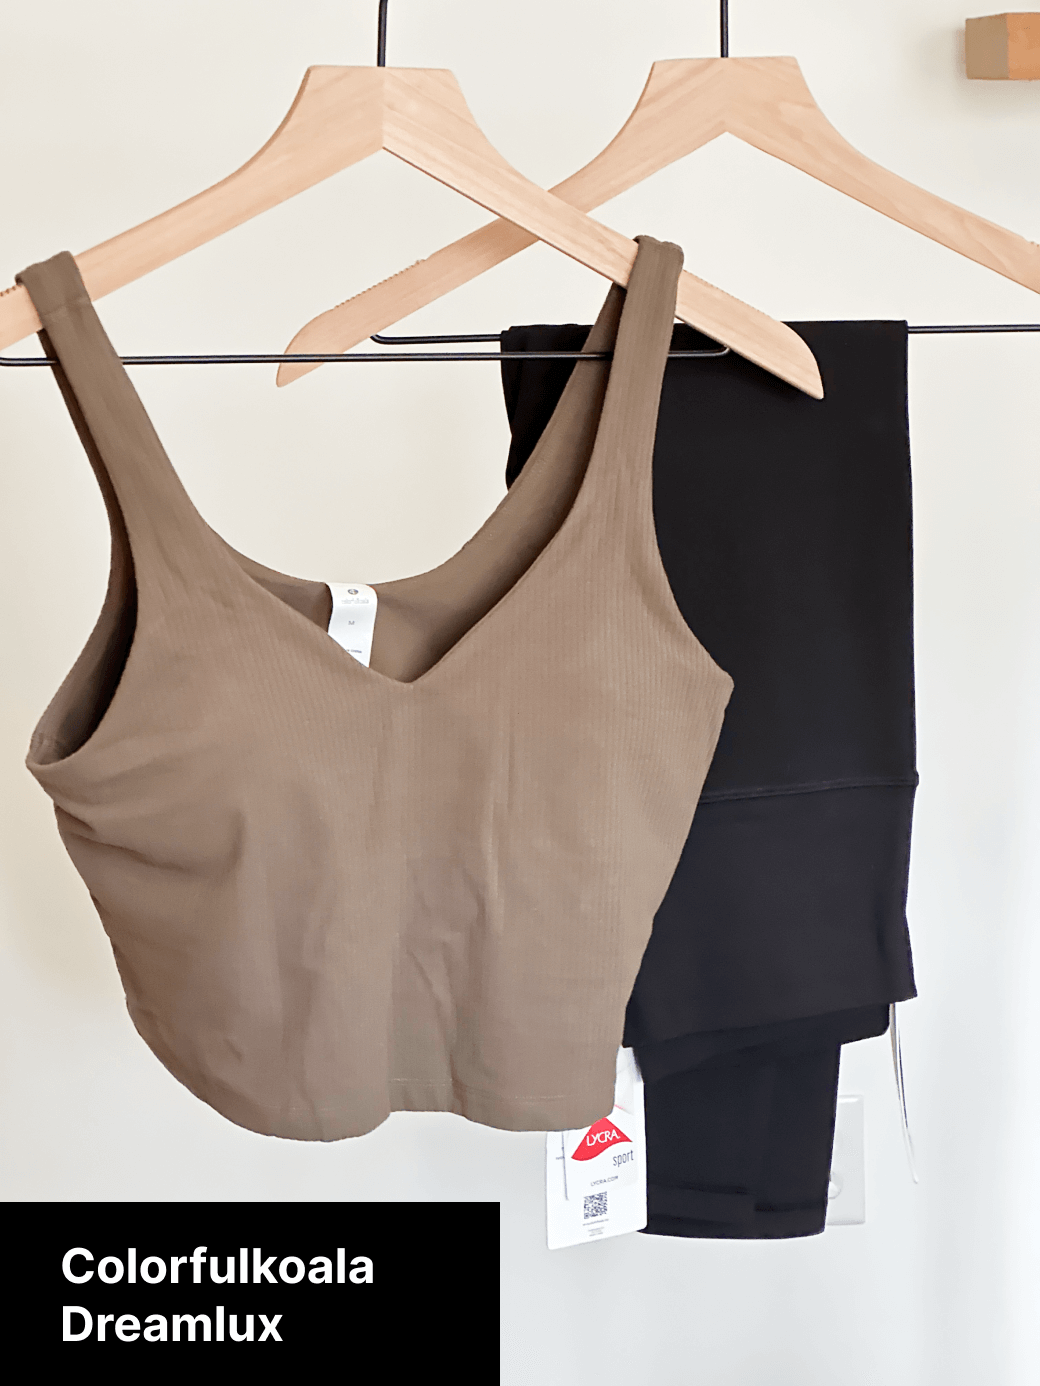 The new Colorfulkoala Dreamlux collection is one of the best affordable activewear lines we've tried